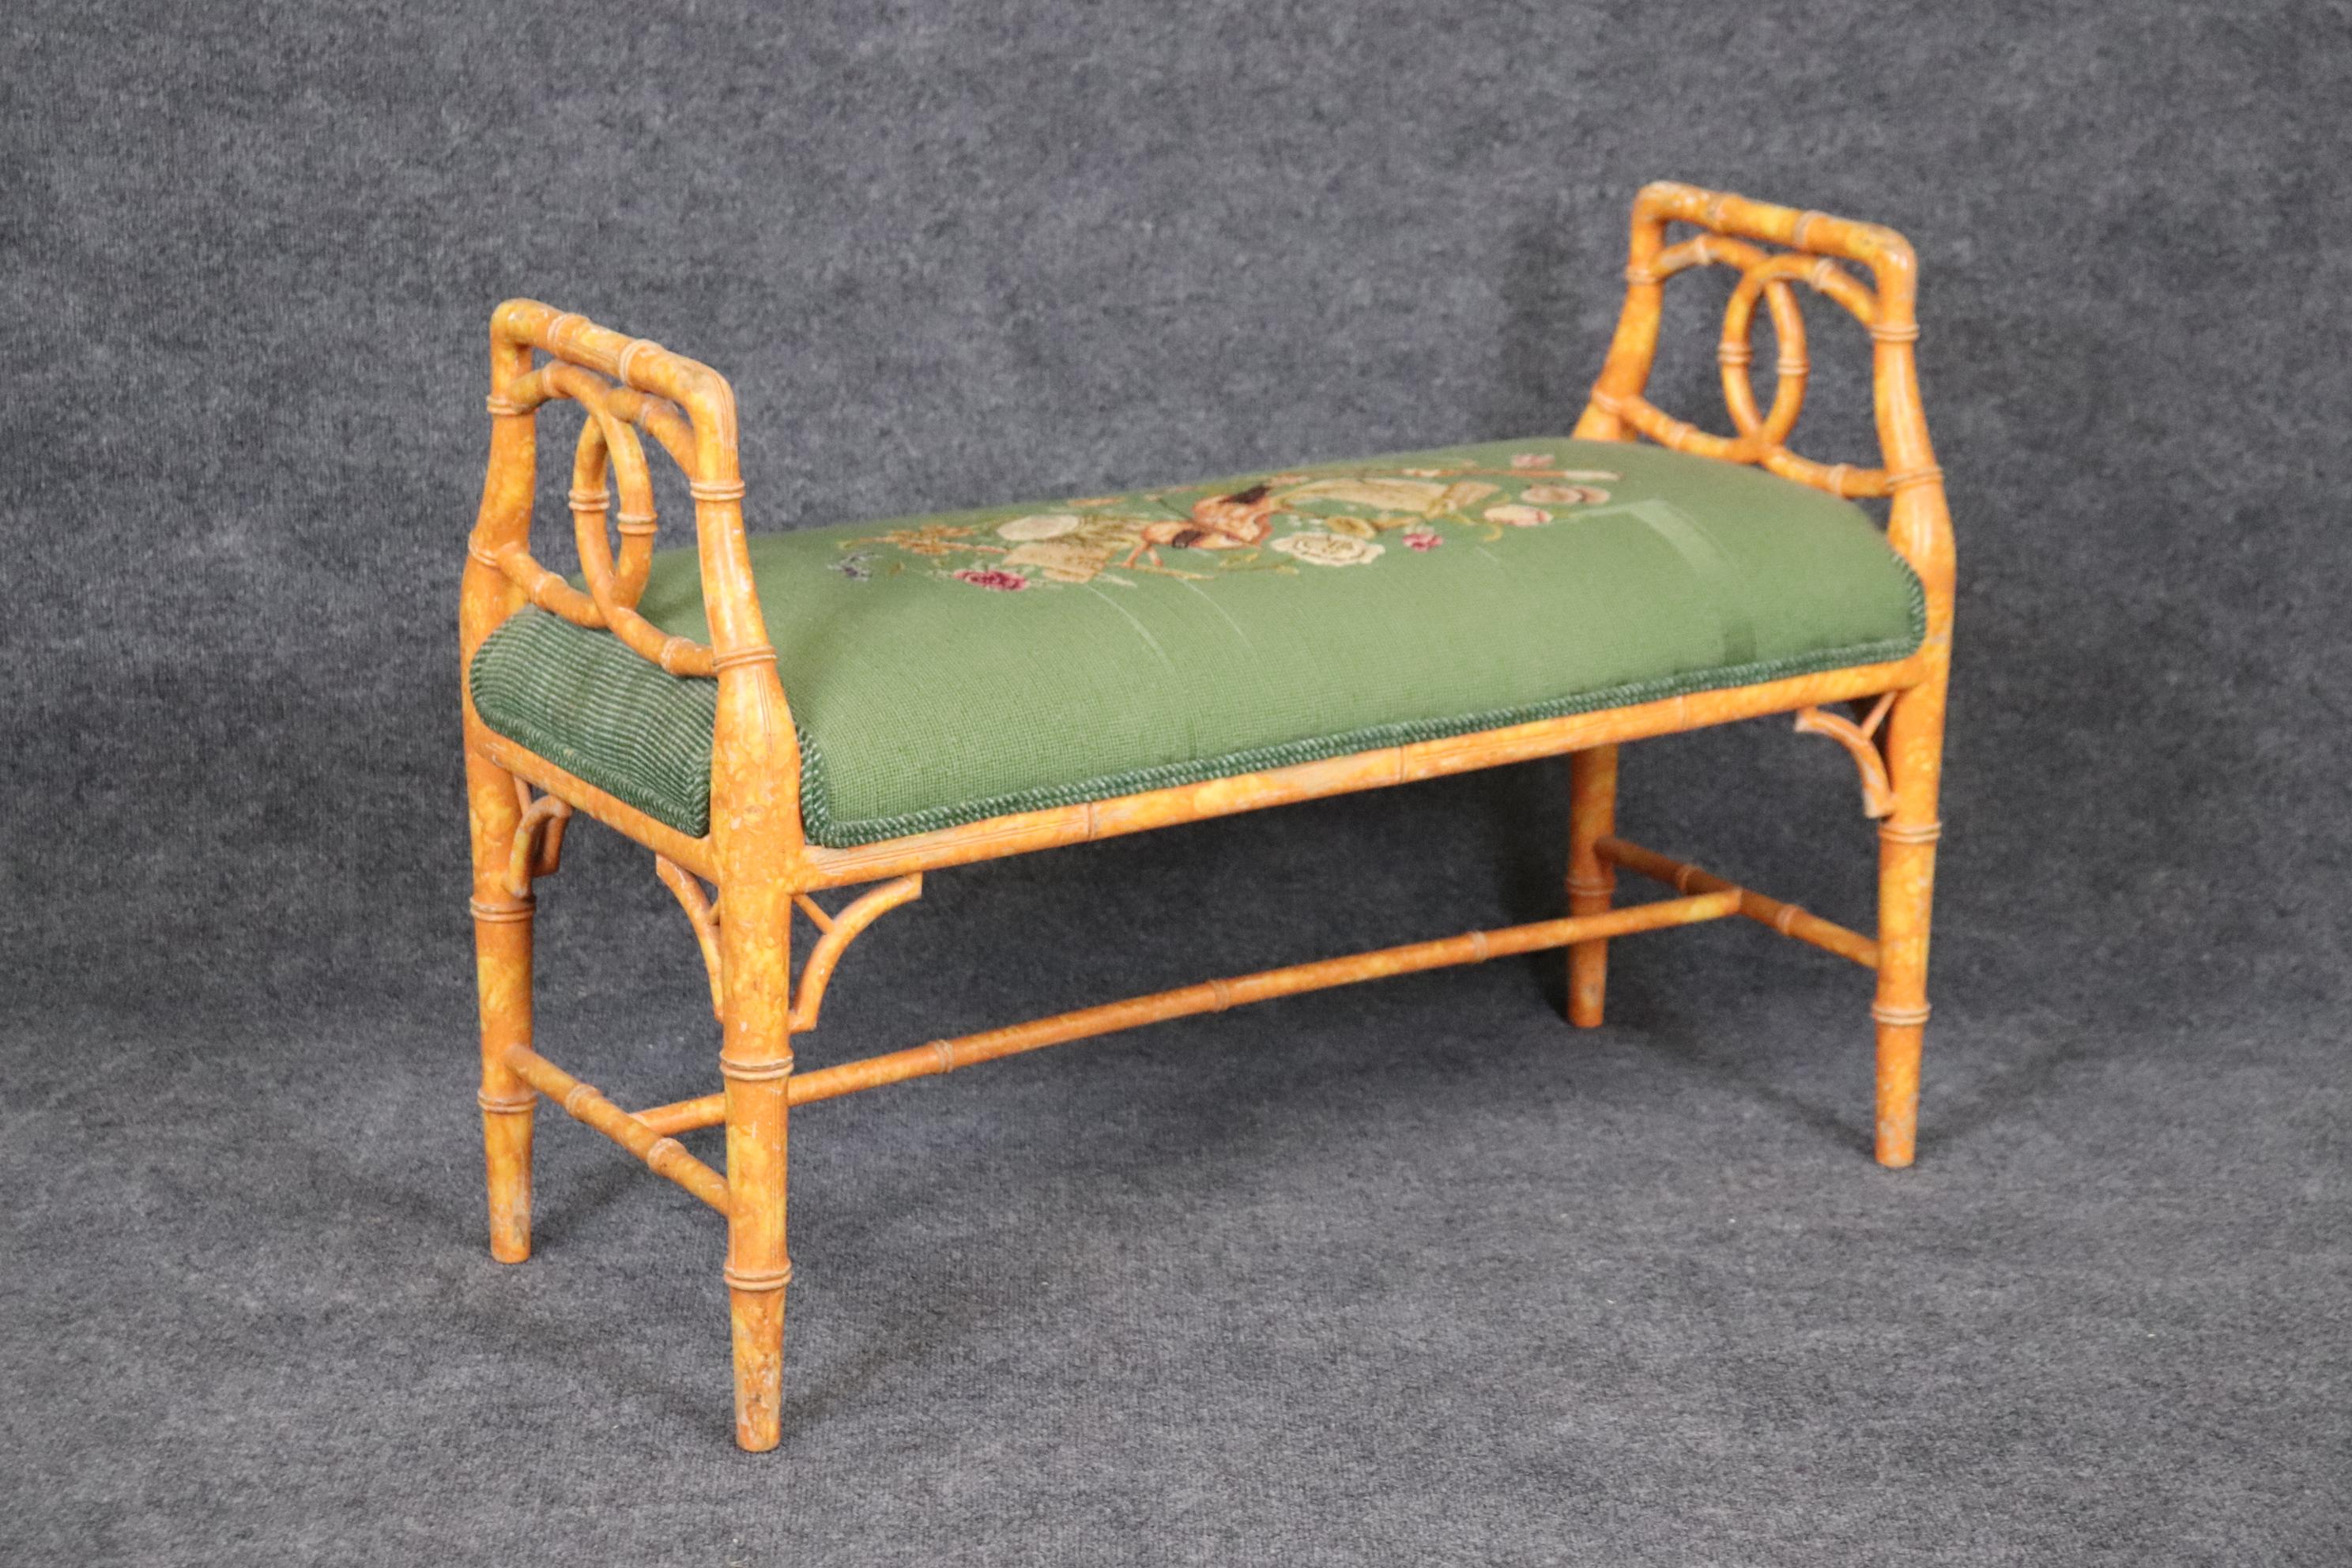 This is a gorgeous faux bamboo bench with needlepoint upholstery depicting volins and musical themes. The bench shows a distressed finish and is original. Measures 25.25 tall x 36.25 wide x 15 deep and seat height is 18.5. dates to the 1950s era